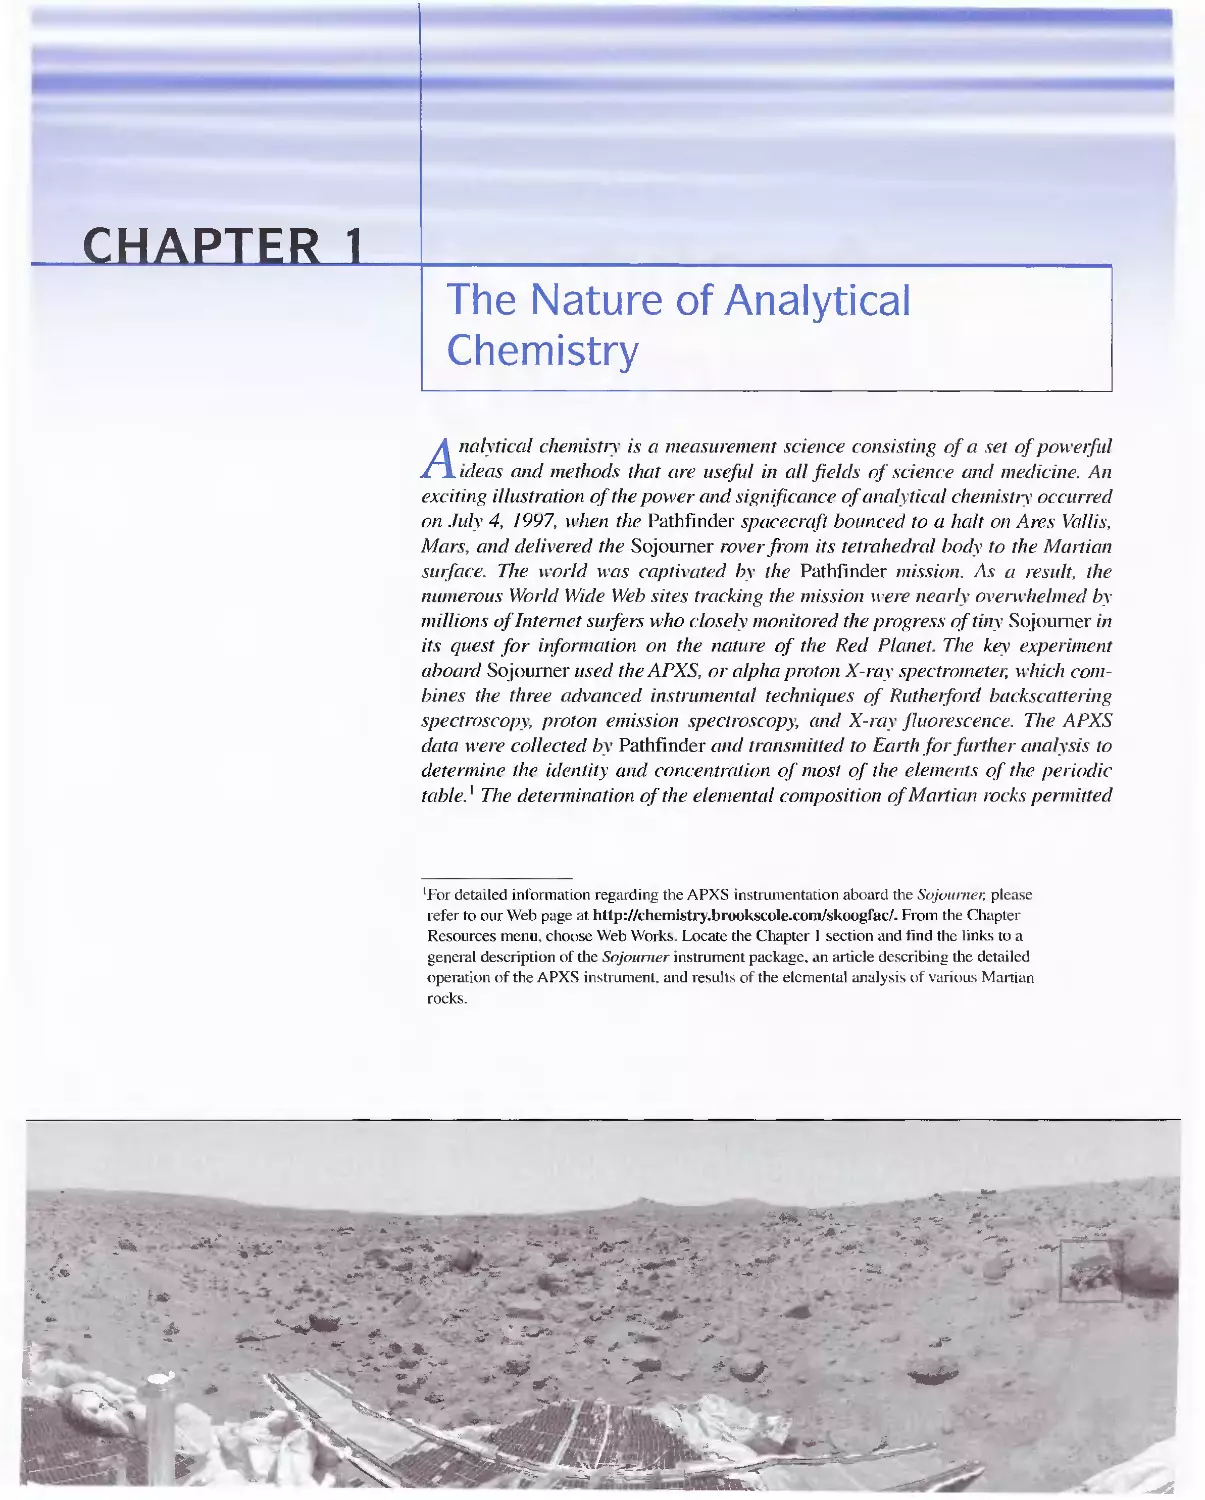 1 - The Nature of Analytical Chemistry